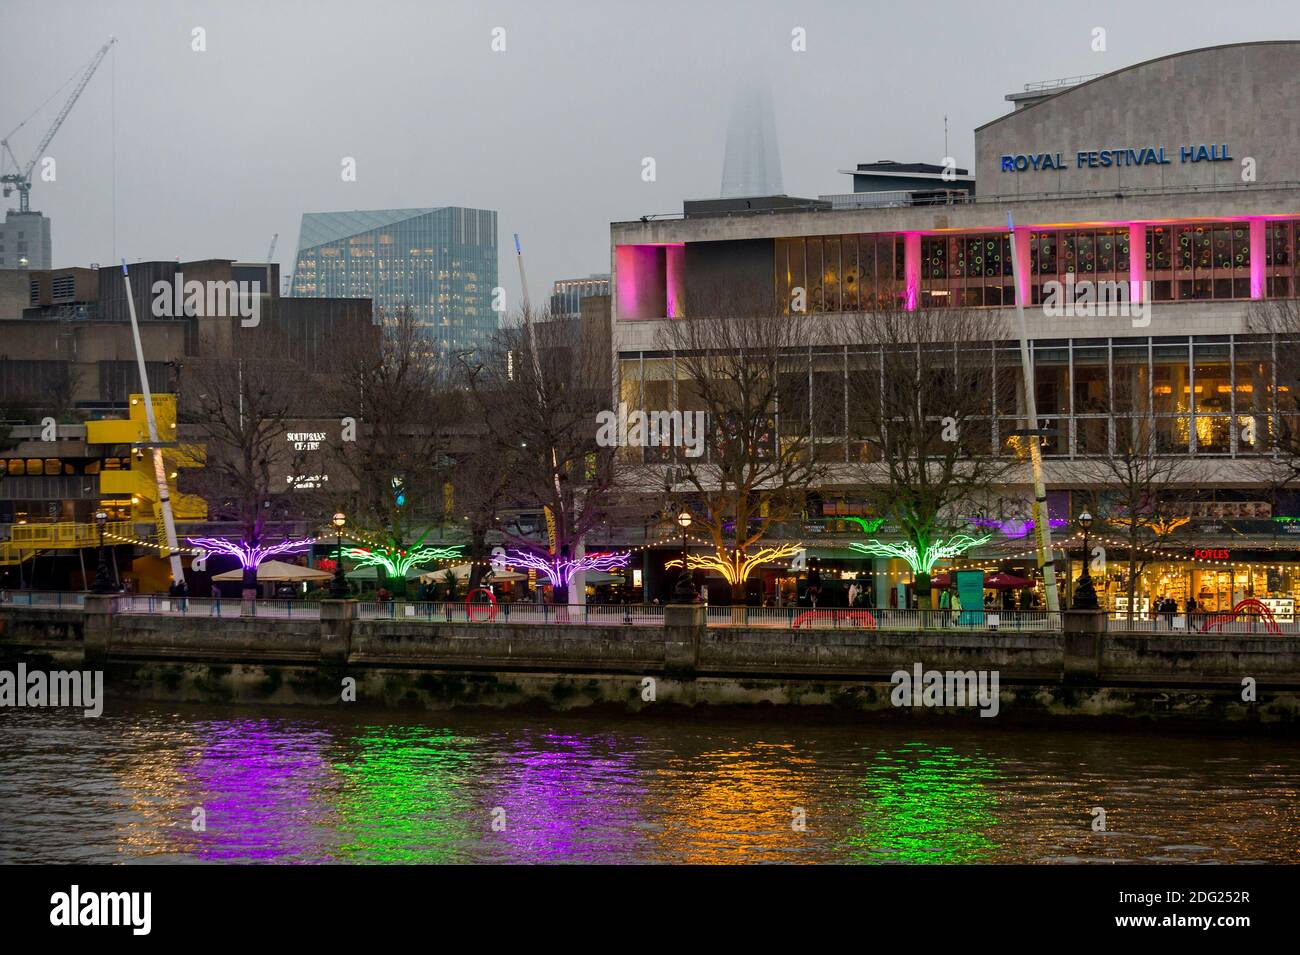 London, UK.  7 December 2020. Illuminations on show during the preview of “Winter Light” presented by Southbank Centre, including 'Lumen' by David Ogle, trees illuminated with glowing neon flex.  Over 15 artworks and new illuminated commissions by a range of leading international artists are on display around the site’s buildings and the Riverside Walk until the end of February 2021. Credit: Stephen Chung / Alamy Live News Stock Photo